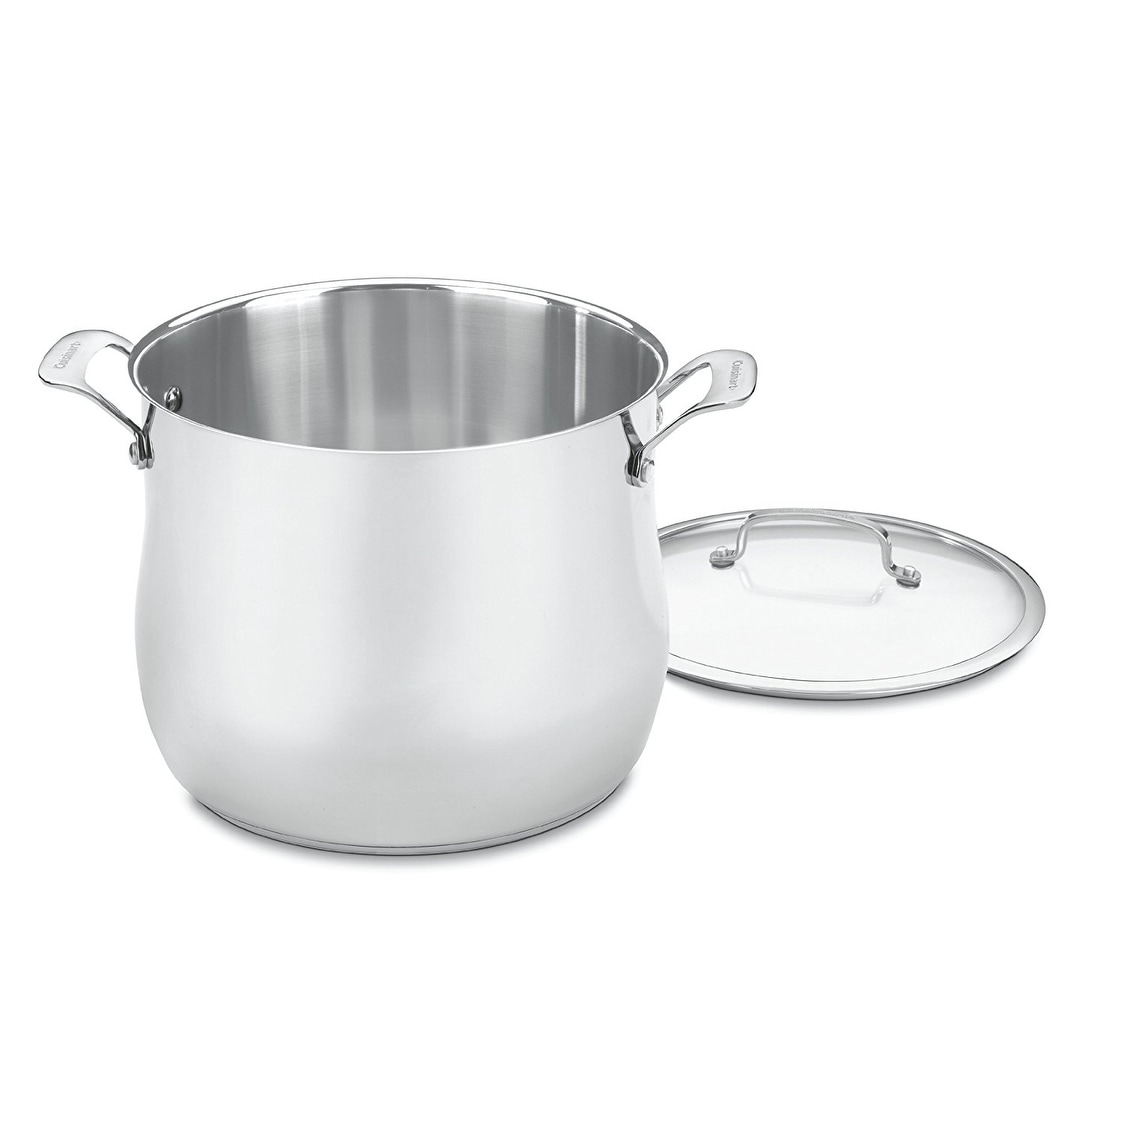 https://ak1.ostkcdn.com/images/products/is/images/direct/965bb4414487b76e29428fd9bedad1613044b671/Cuisinart-466-26-Contour-Stainless-12-Quart-Stockpot-with-Glass-Cover.jpg